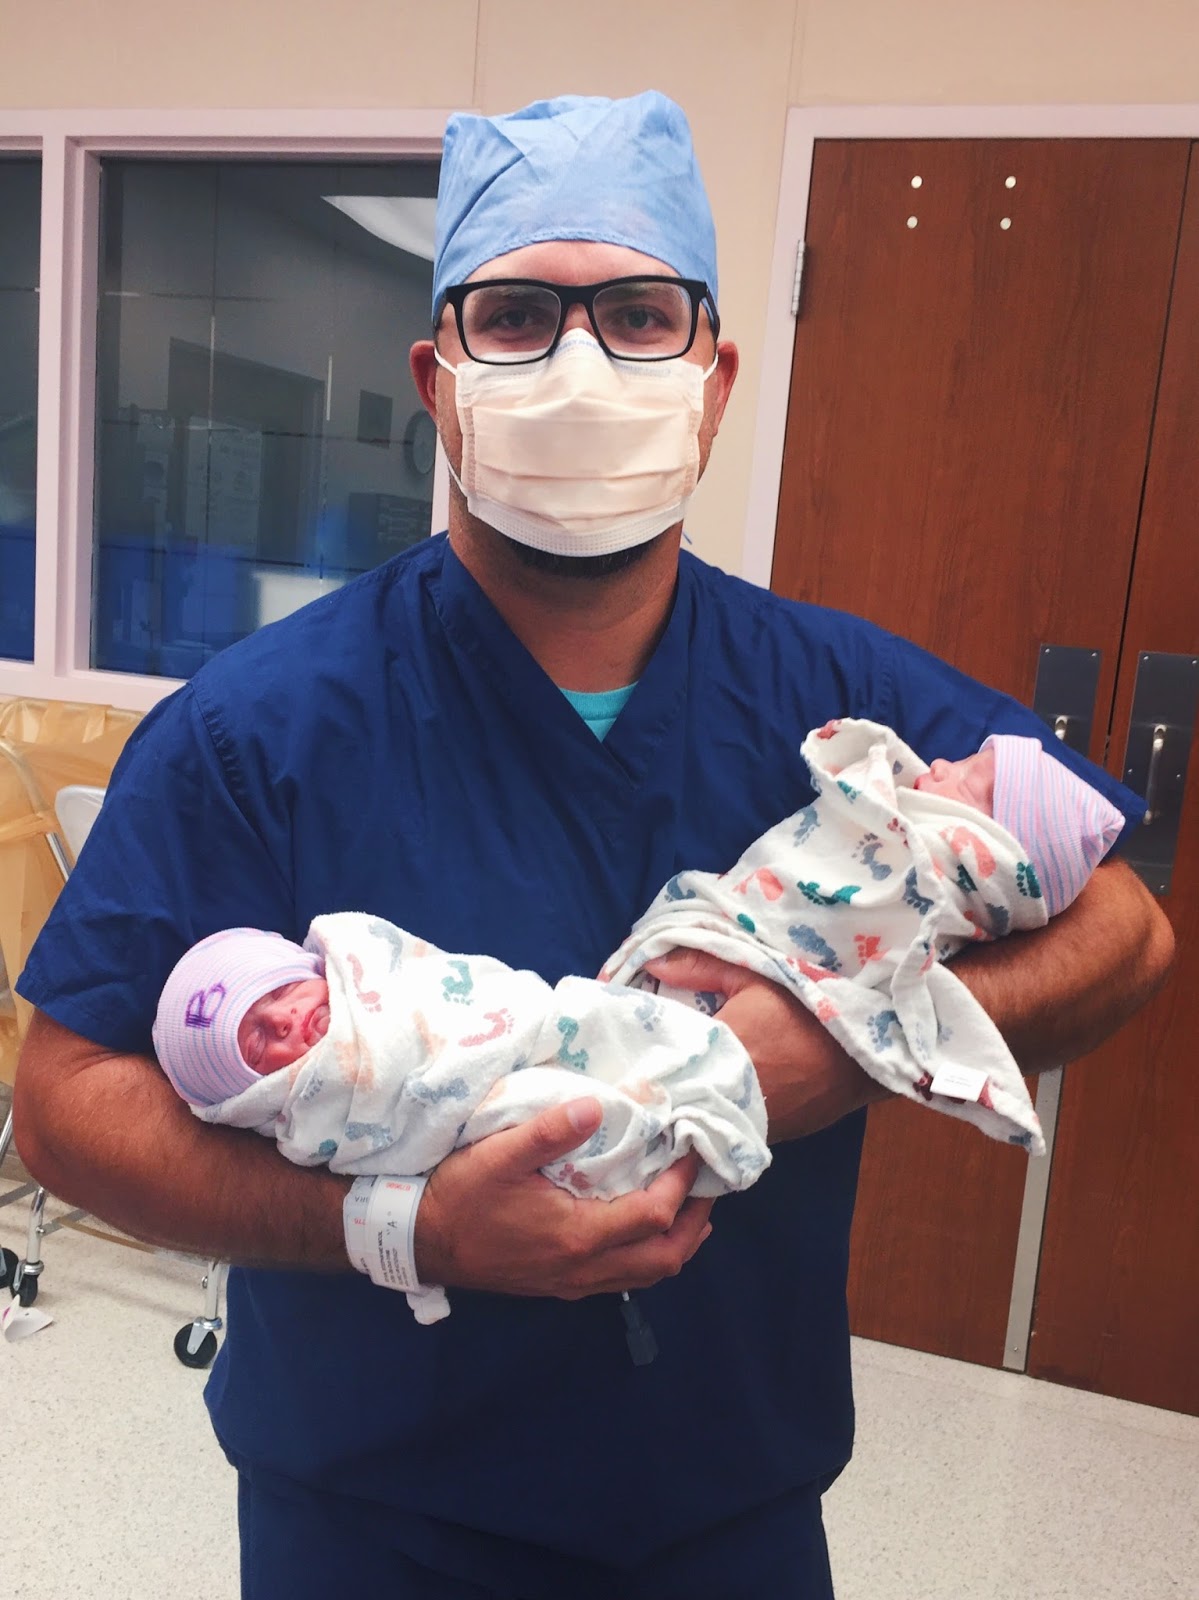 Twin Boy Birth Photo After C-Section